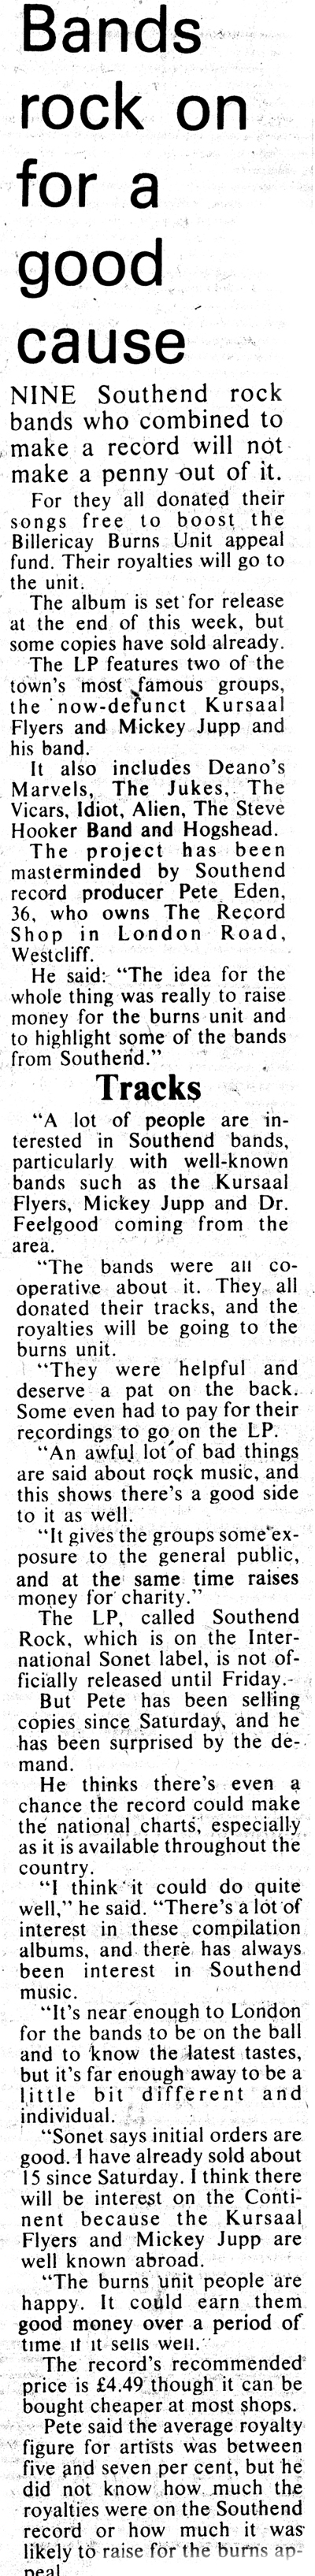 Southend Rock album - Local Newspaper Clipping